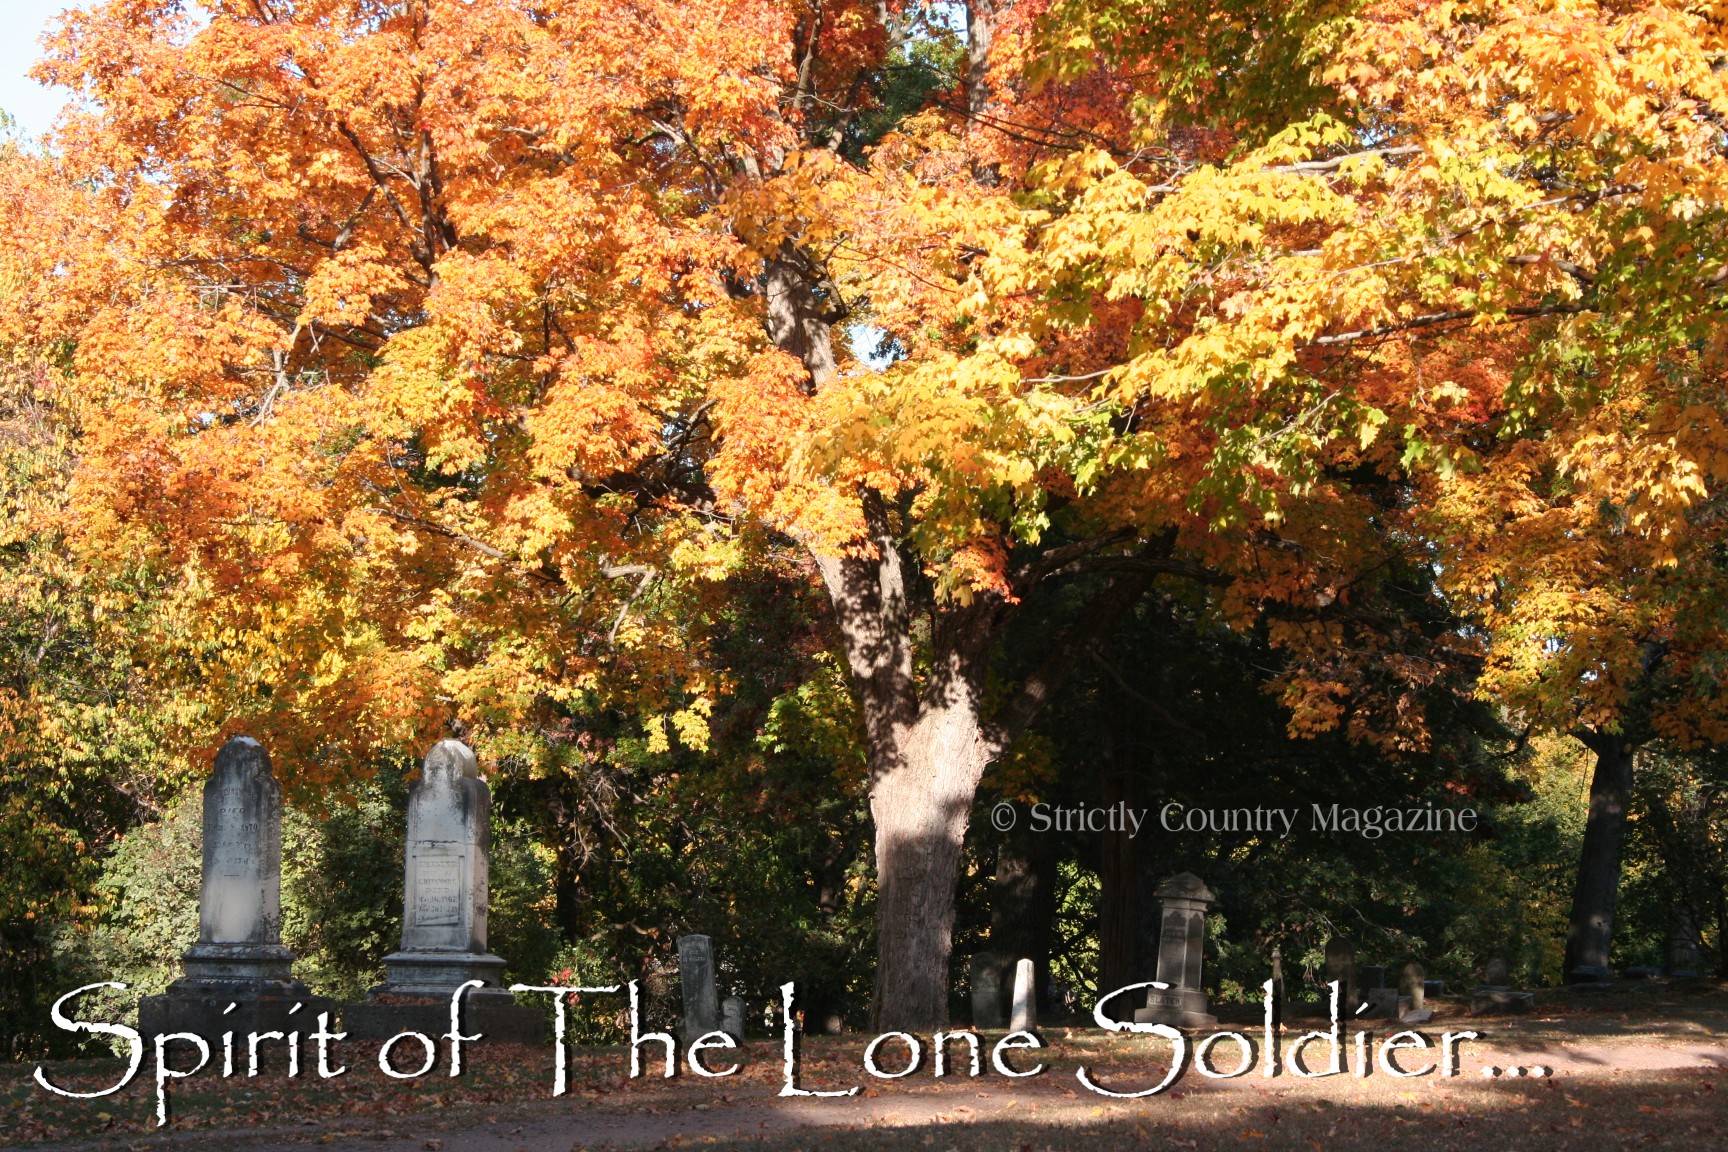 Strictly Country Magazine copyright Mark Brinkman The Spirit of The Lone Soldier header